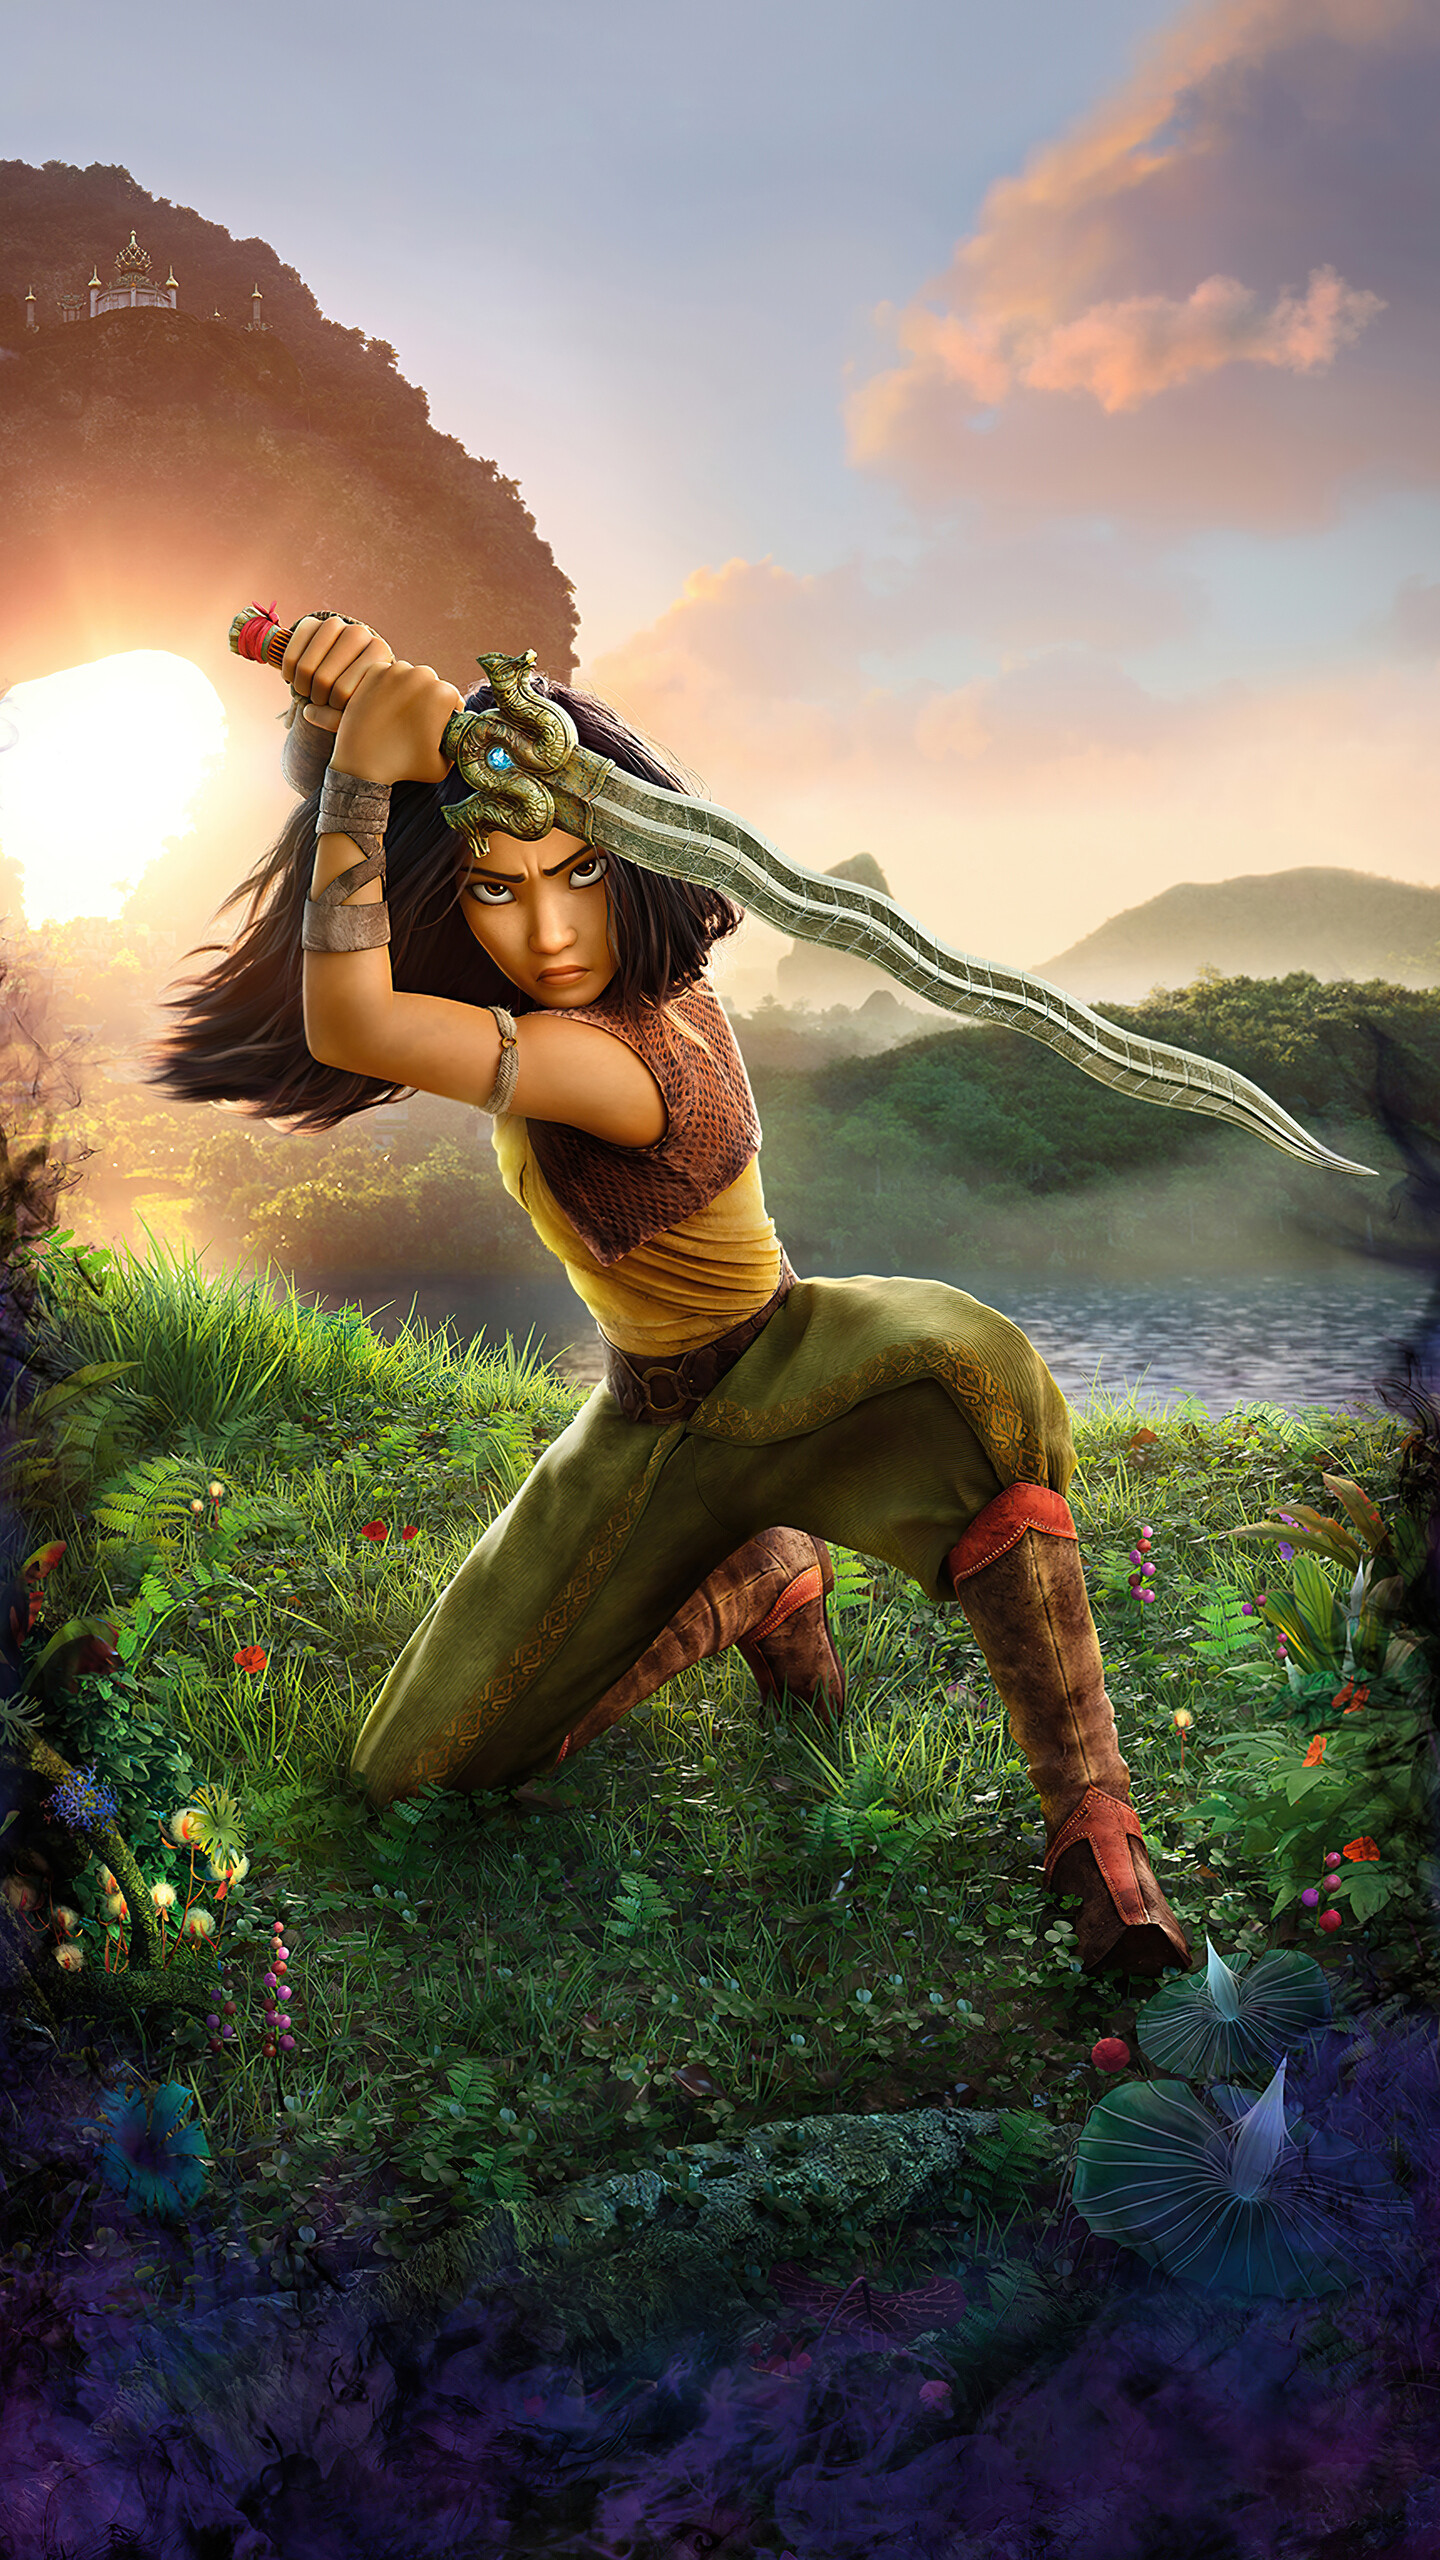 Raya and the Last Dragon: Raya, tries to banish the evil spirits known as the Druun from the land of Kumandra. 1440x2560 HD Wallpaper.